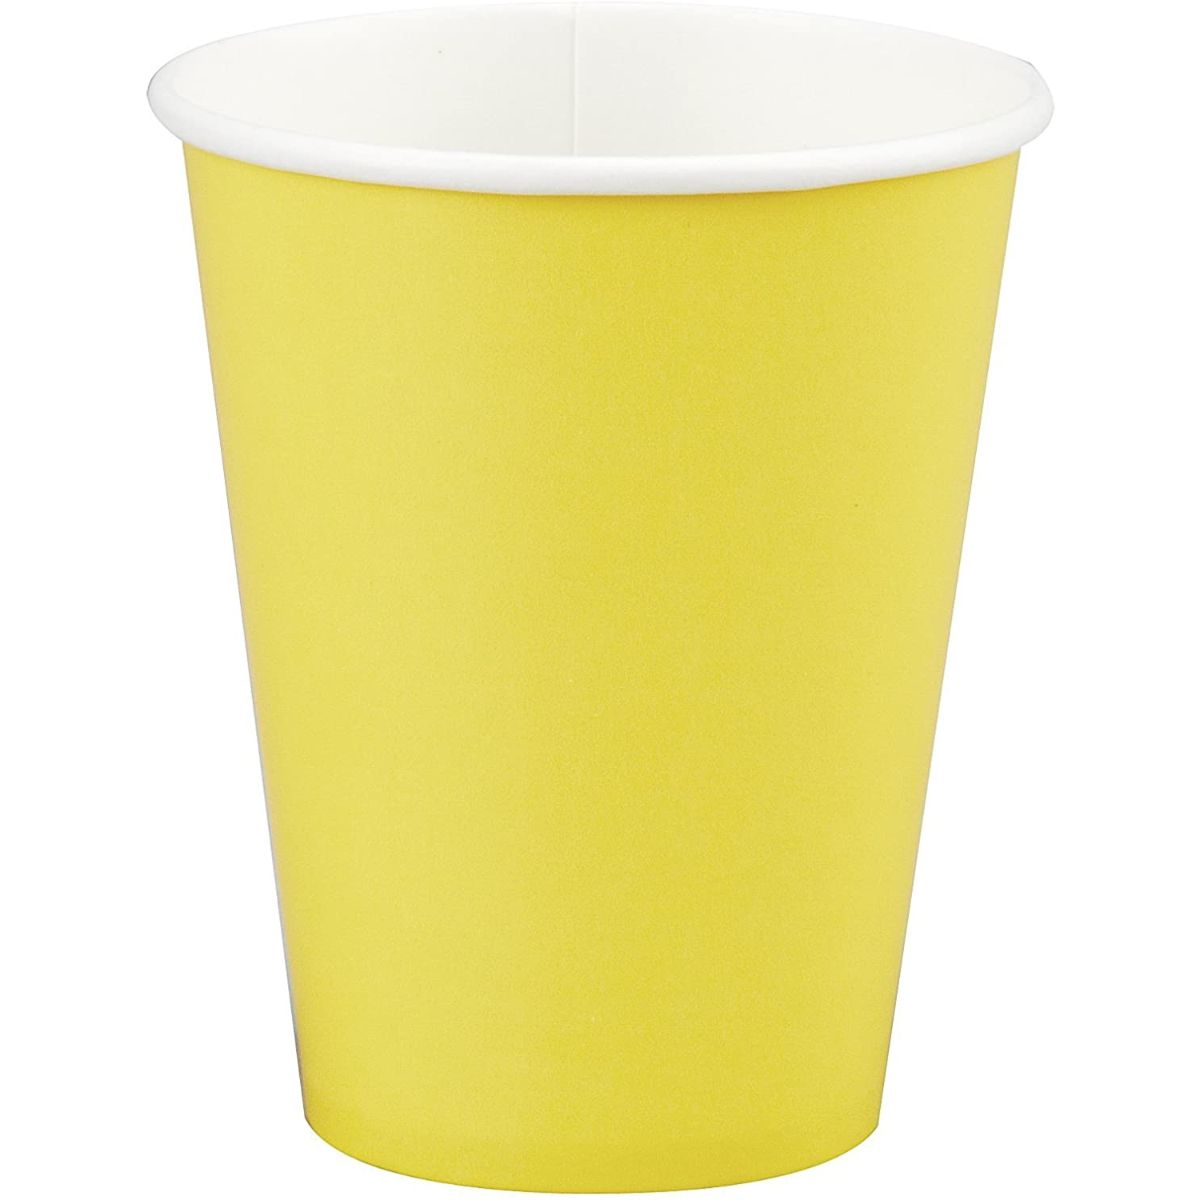 Round 75 ml Printed Paper Cups, Size : Standard, Color : Multi